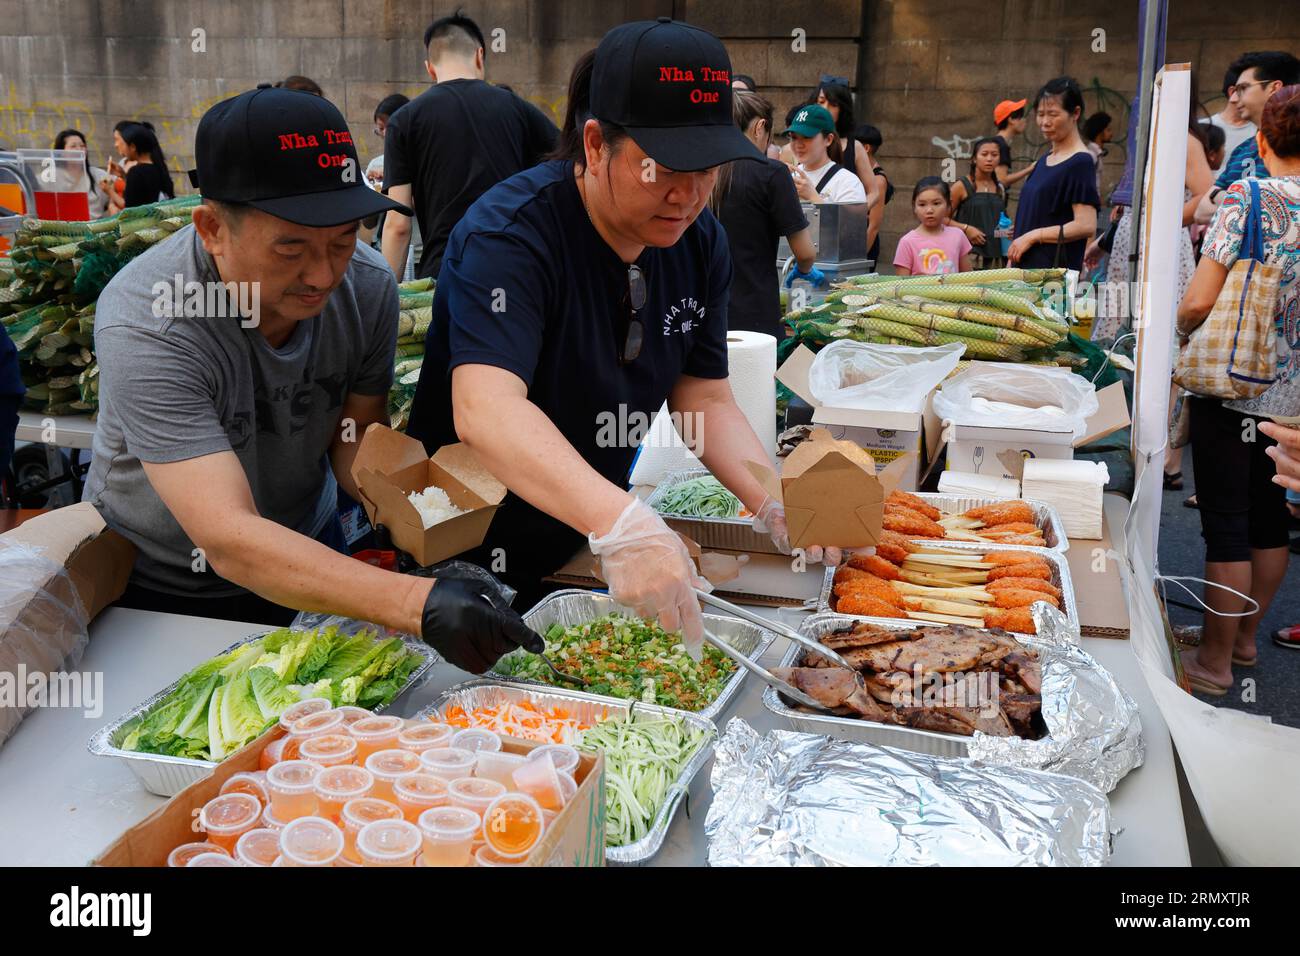 Nha Trang One restaurant staff pack takeout boxes at a Think! Chinatown night market event in Chinatown, New York, July 23, 2023. Stock Photo